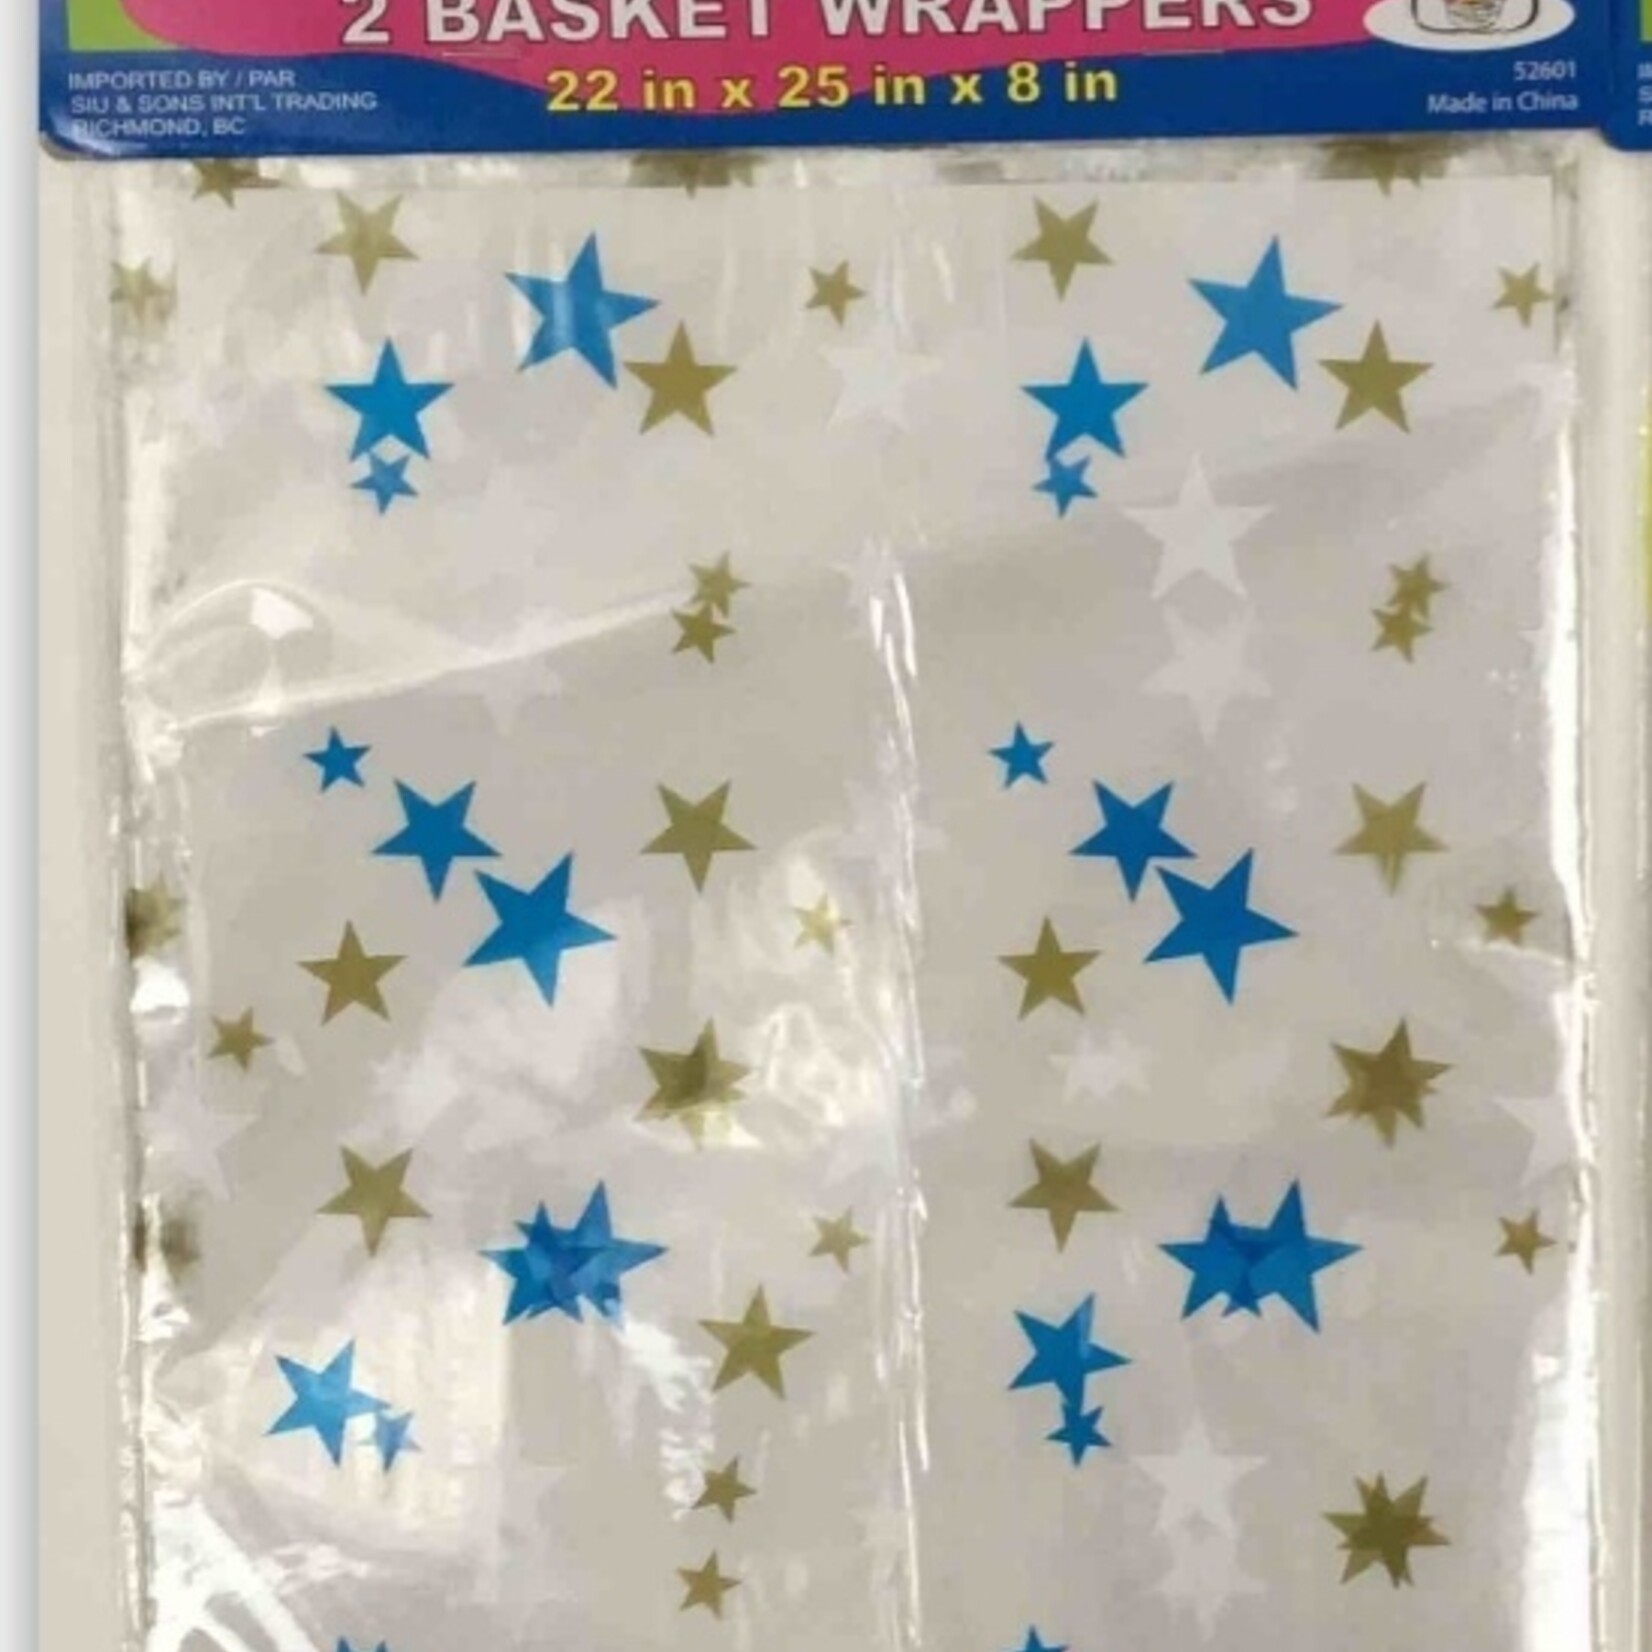 Basket Wrappers 22 X 25 X 8 Inches (2 pack)